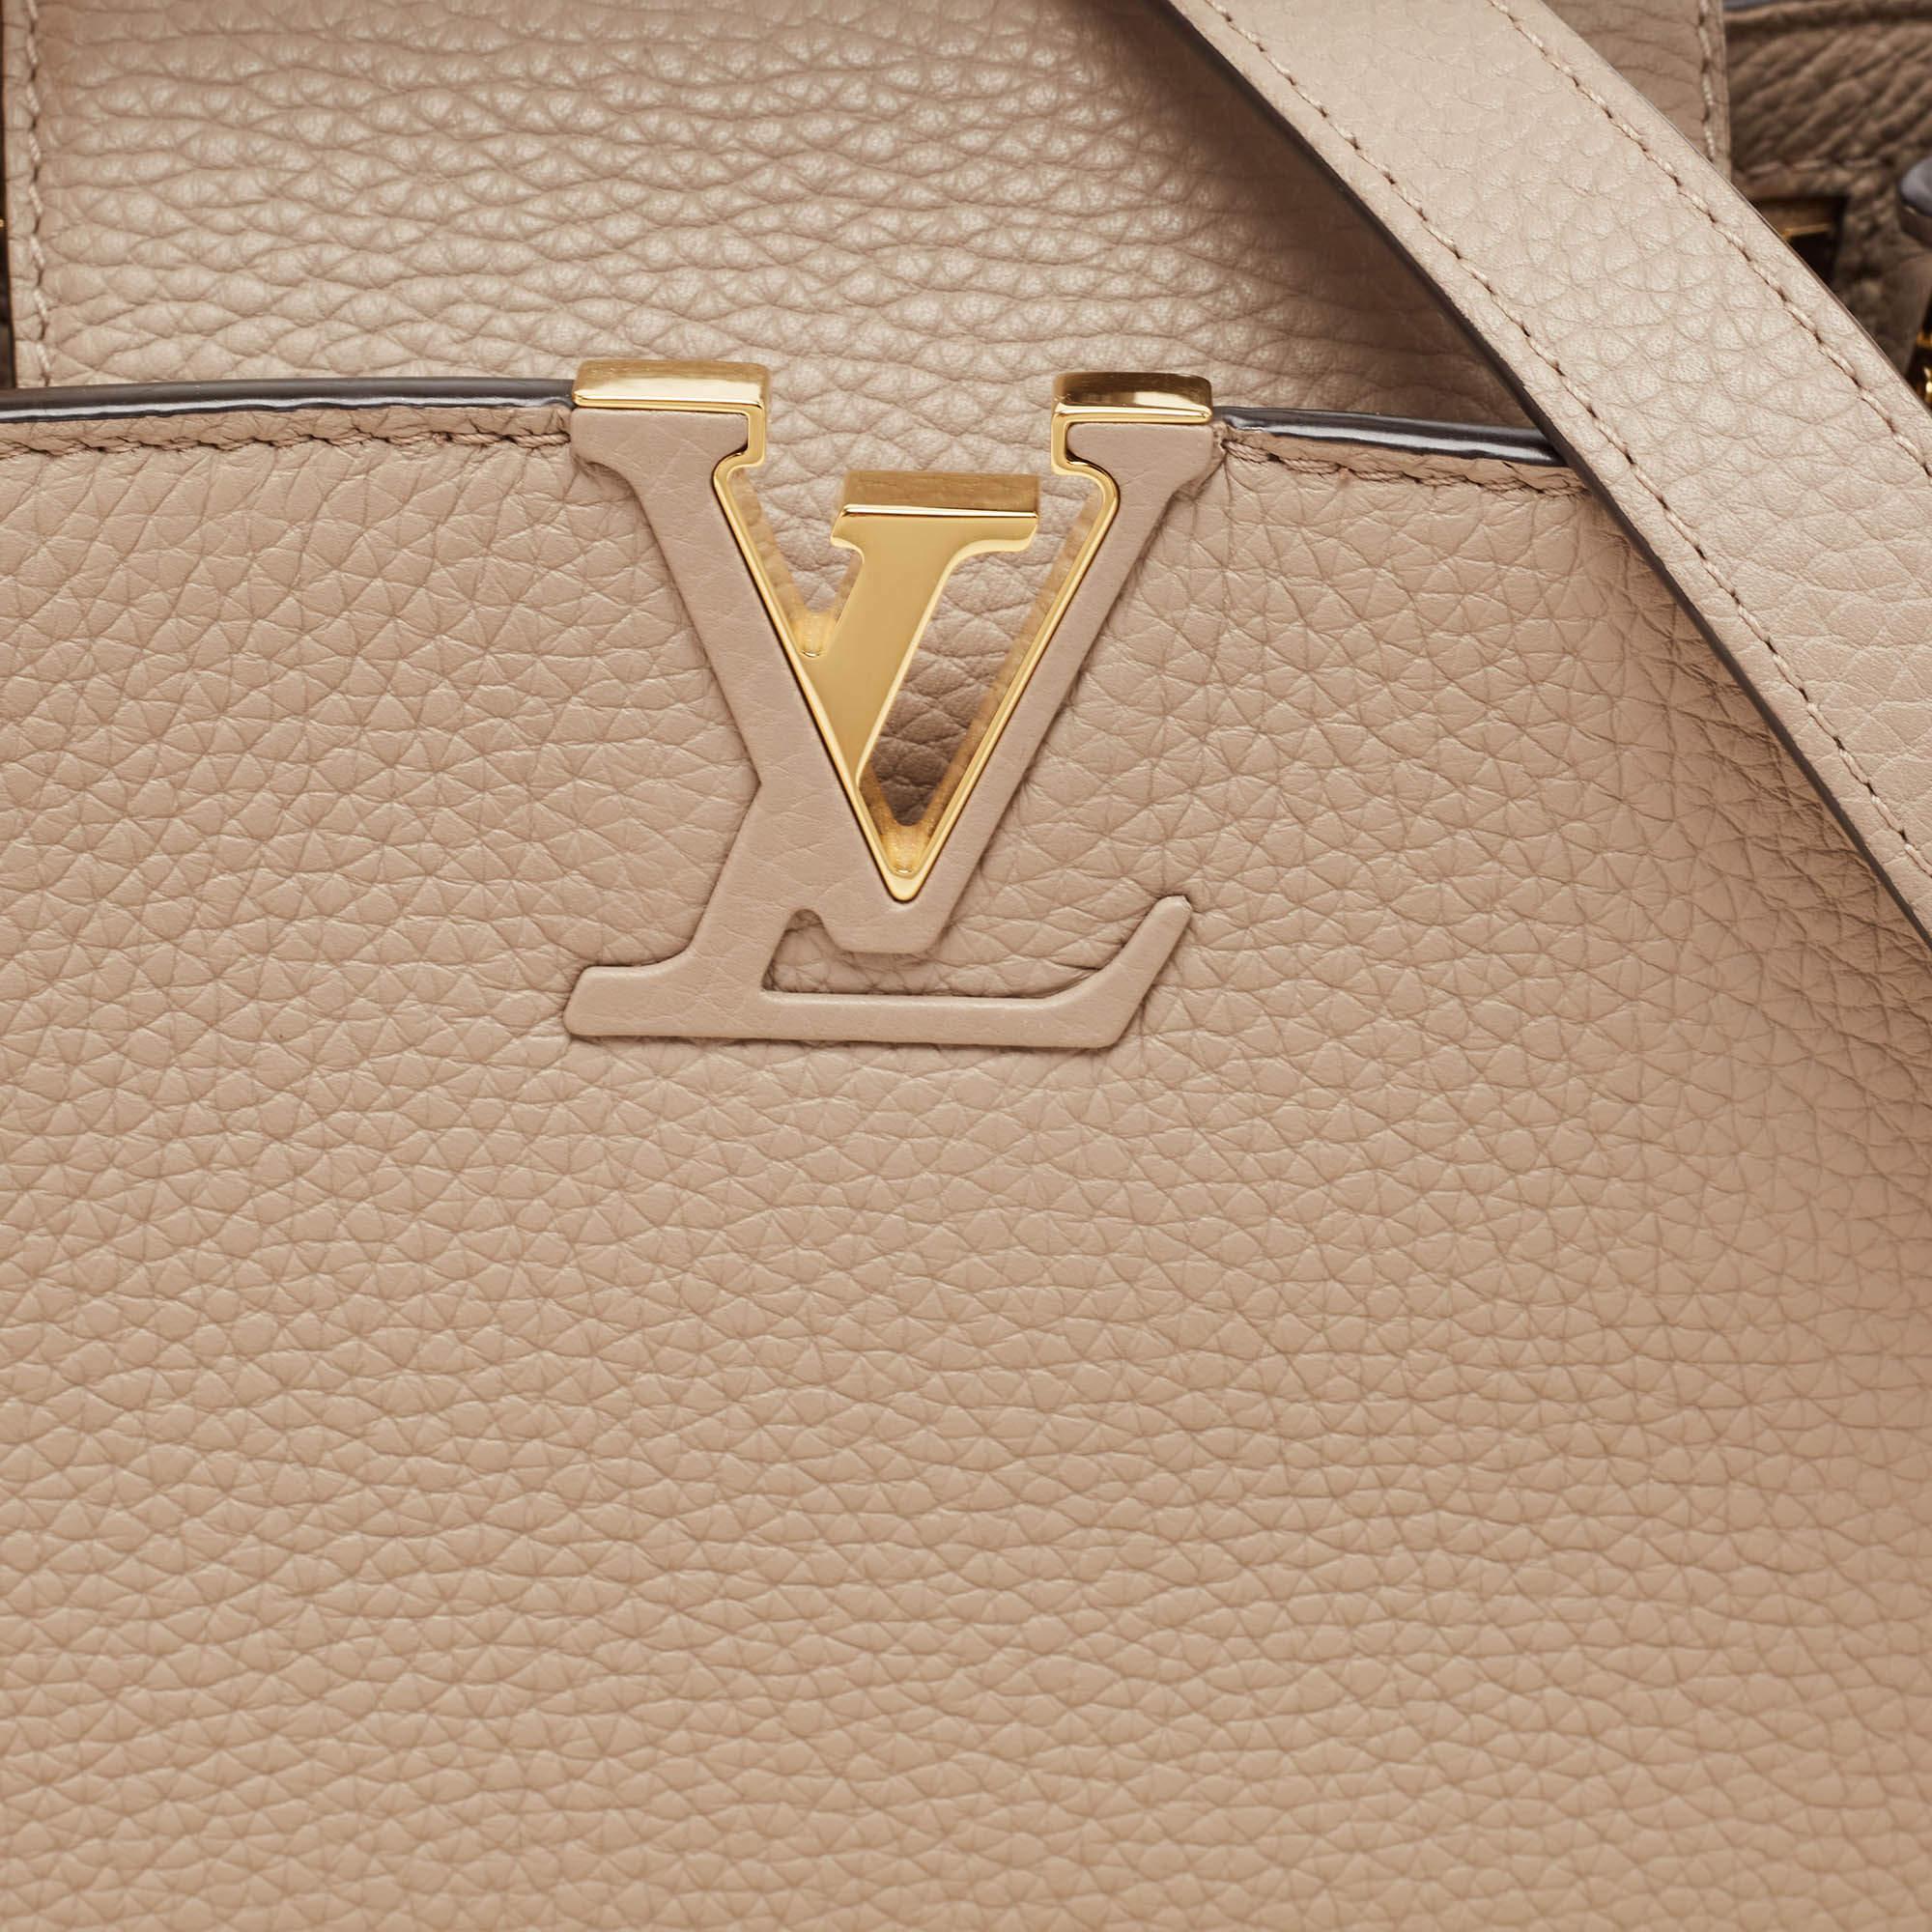 Louis Vuitton Galet Taurillon Leather and Python Capucines BB Bag 7